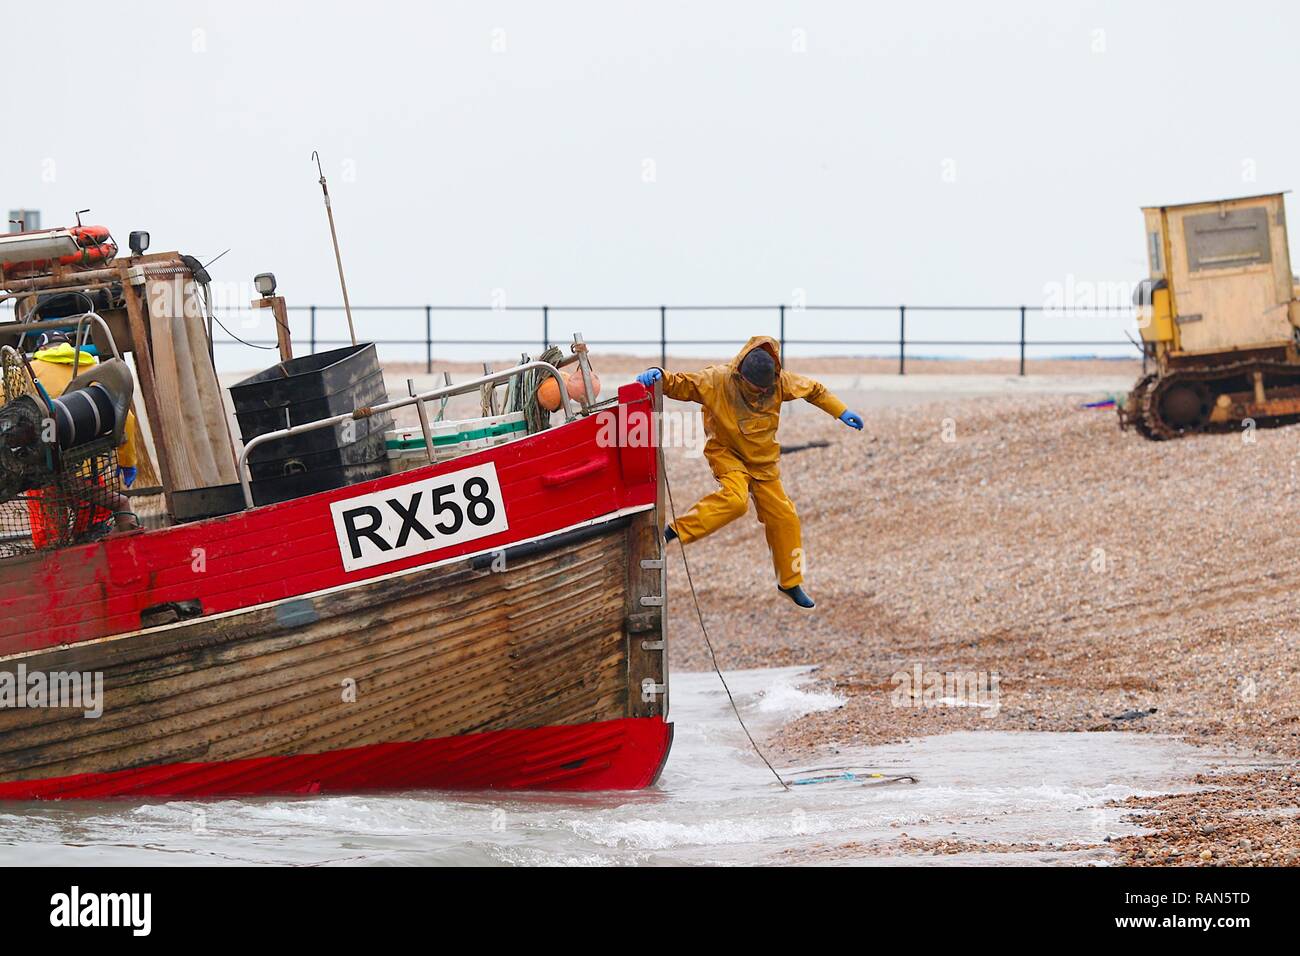 Hastings, East Sussex, UK. 05 Jan, 2019. UK Weather: A fisherman jumps from his fishing boat after landing at shore onto the stade, the largest beach launched fishing fleet in the UK, Hastings, East Sussex. © Paul Lawrenson 2018, Photo Credit: Paul Lawrenson / Alamy Live News Stock Photo